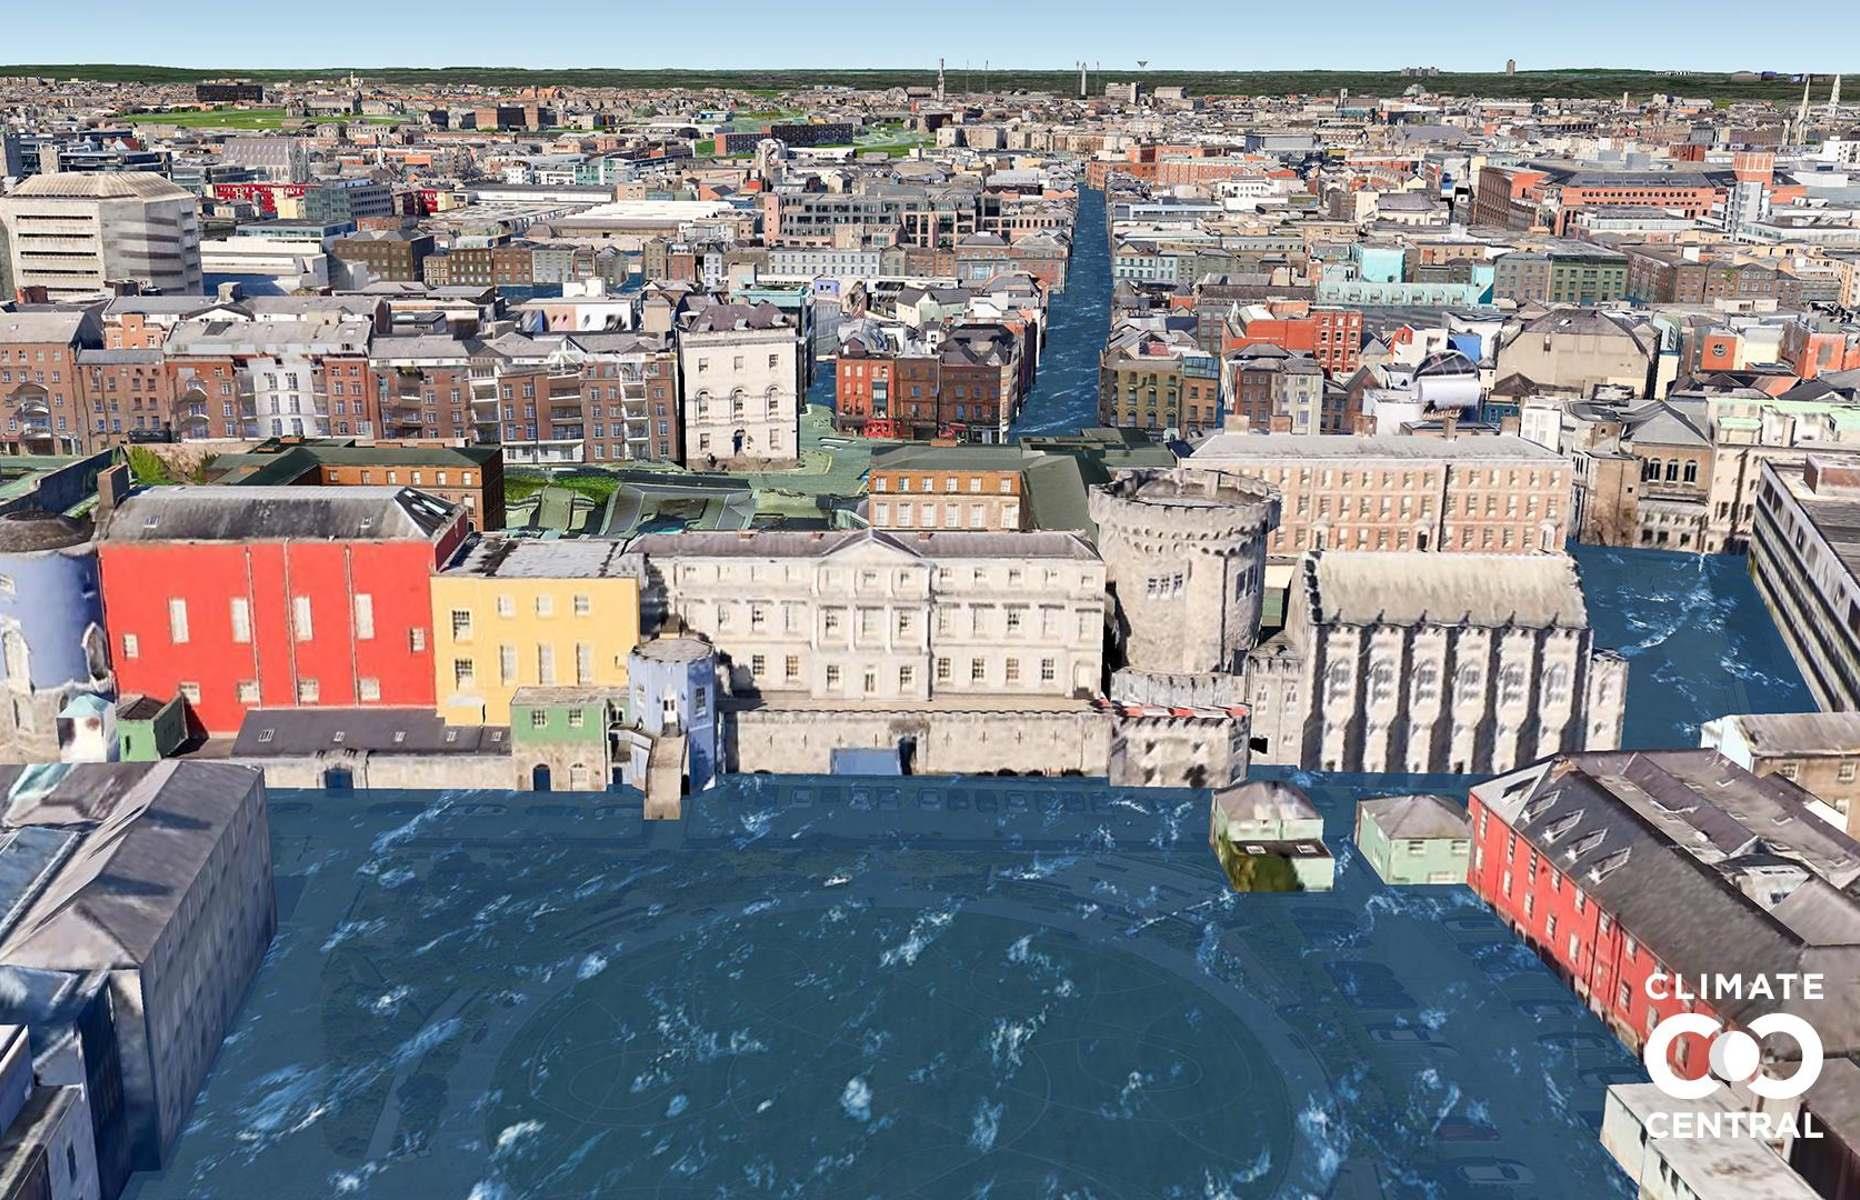 Dublin is sliced apart by the River Liffey, which empties out into Dublin Bay. But large areas of this historic coastal city are set to be wiped out by rising sea levels, as you can see from this image, depicting flooded roads and castle grounds.